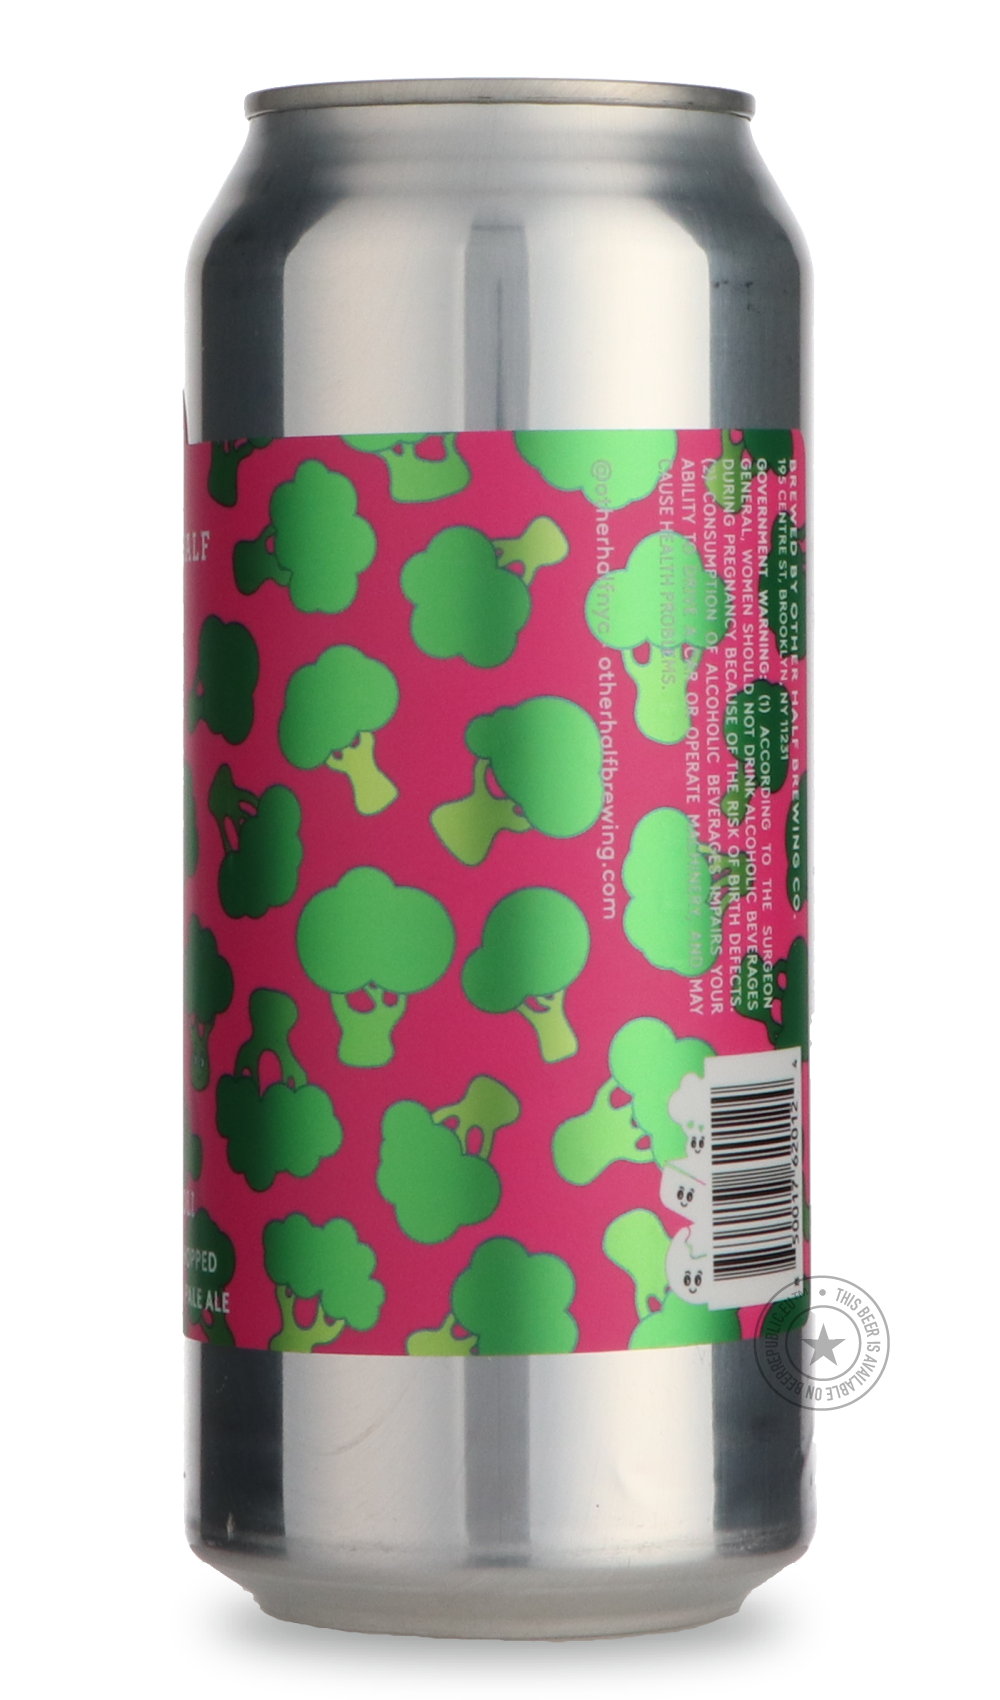 -Other Half- Broccoli-IPA- Only @ Beer Republic - The best online beer store for American & Canadian craft beer - Buy beer online from the USA and Canada - Bier online kopen - Amerikaans bier kopen - Craft beer store - Craft beer kopen - Amerikanisch bier kaufen - Bier online kaufen - Acheter biere online - IPA - Stout - Porter - New England IPA - Hazy IPA - Imperial Stout - Barrel Aged - Barrel Aged Imperial Stout - Brown - Dark beer - Blond - Blonde - Pilsner - Lager - Wheat - Weizen - Amber - Barley Wine